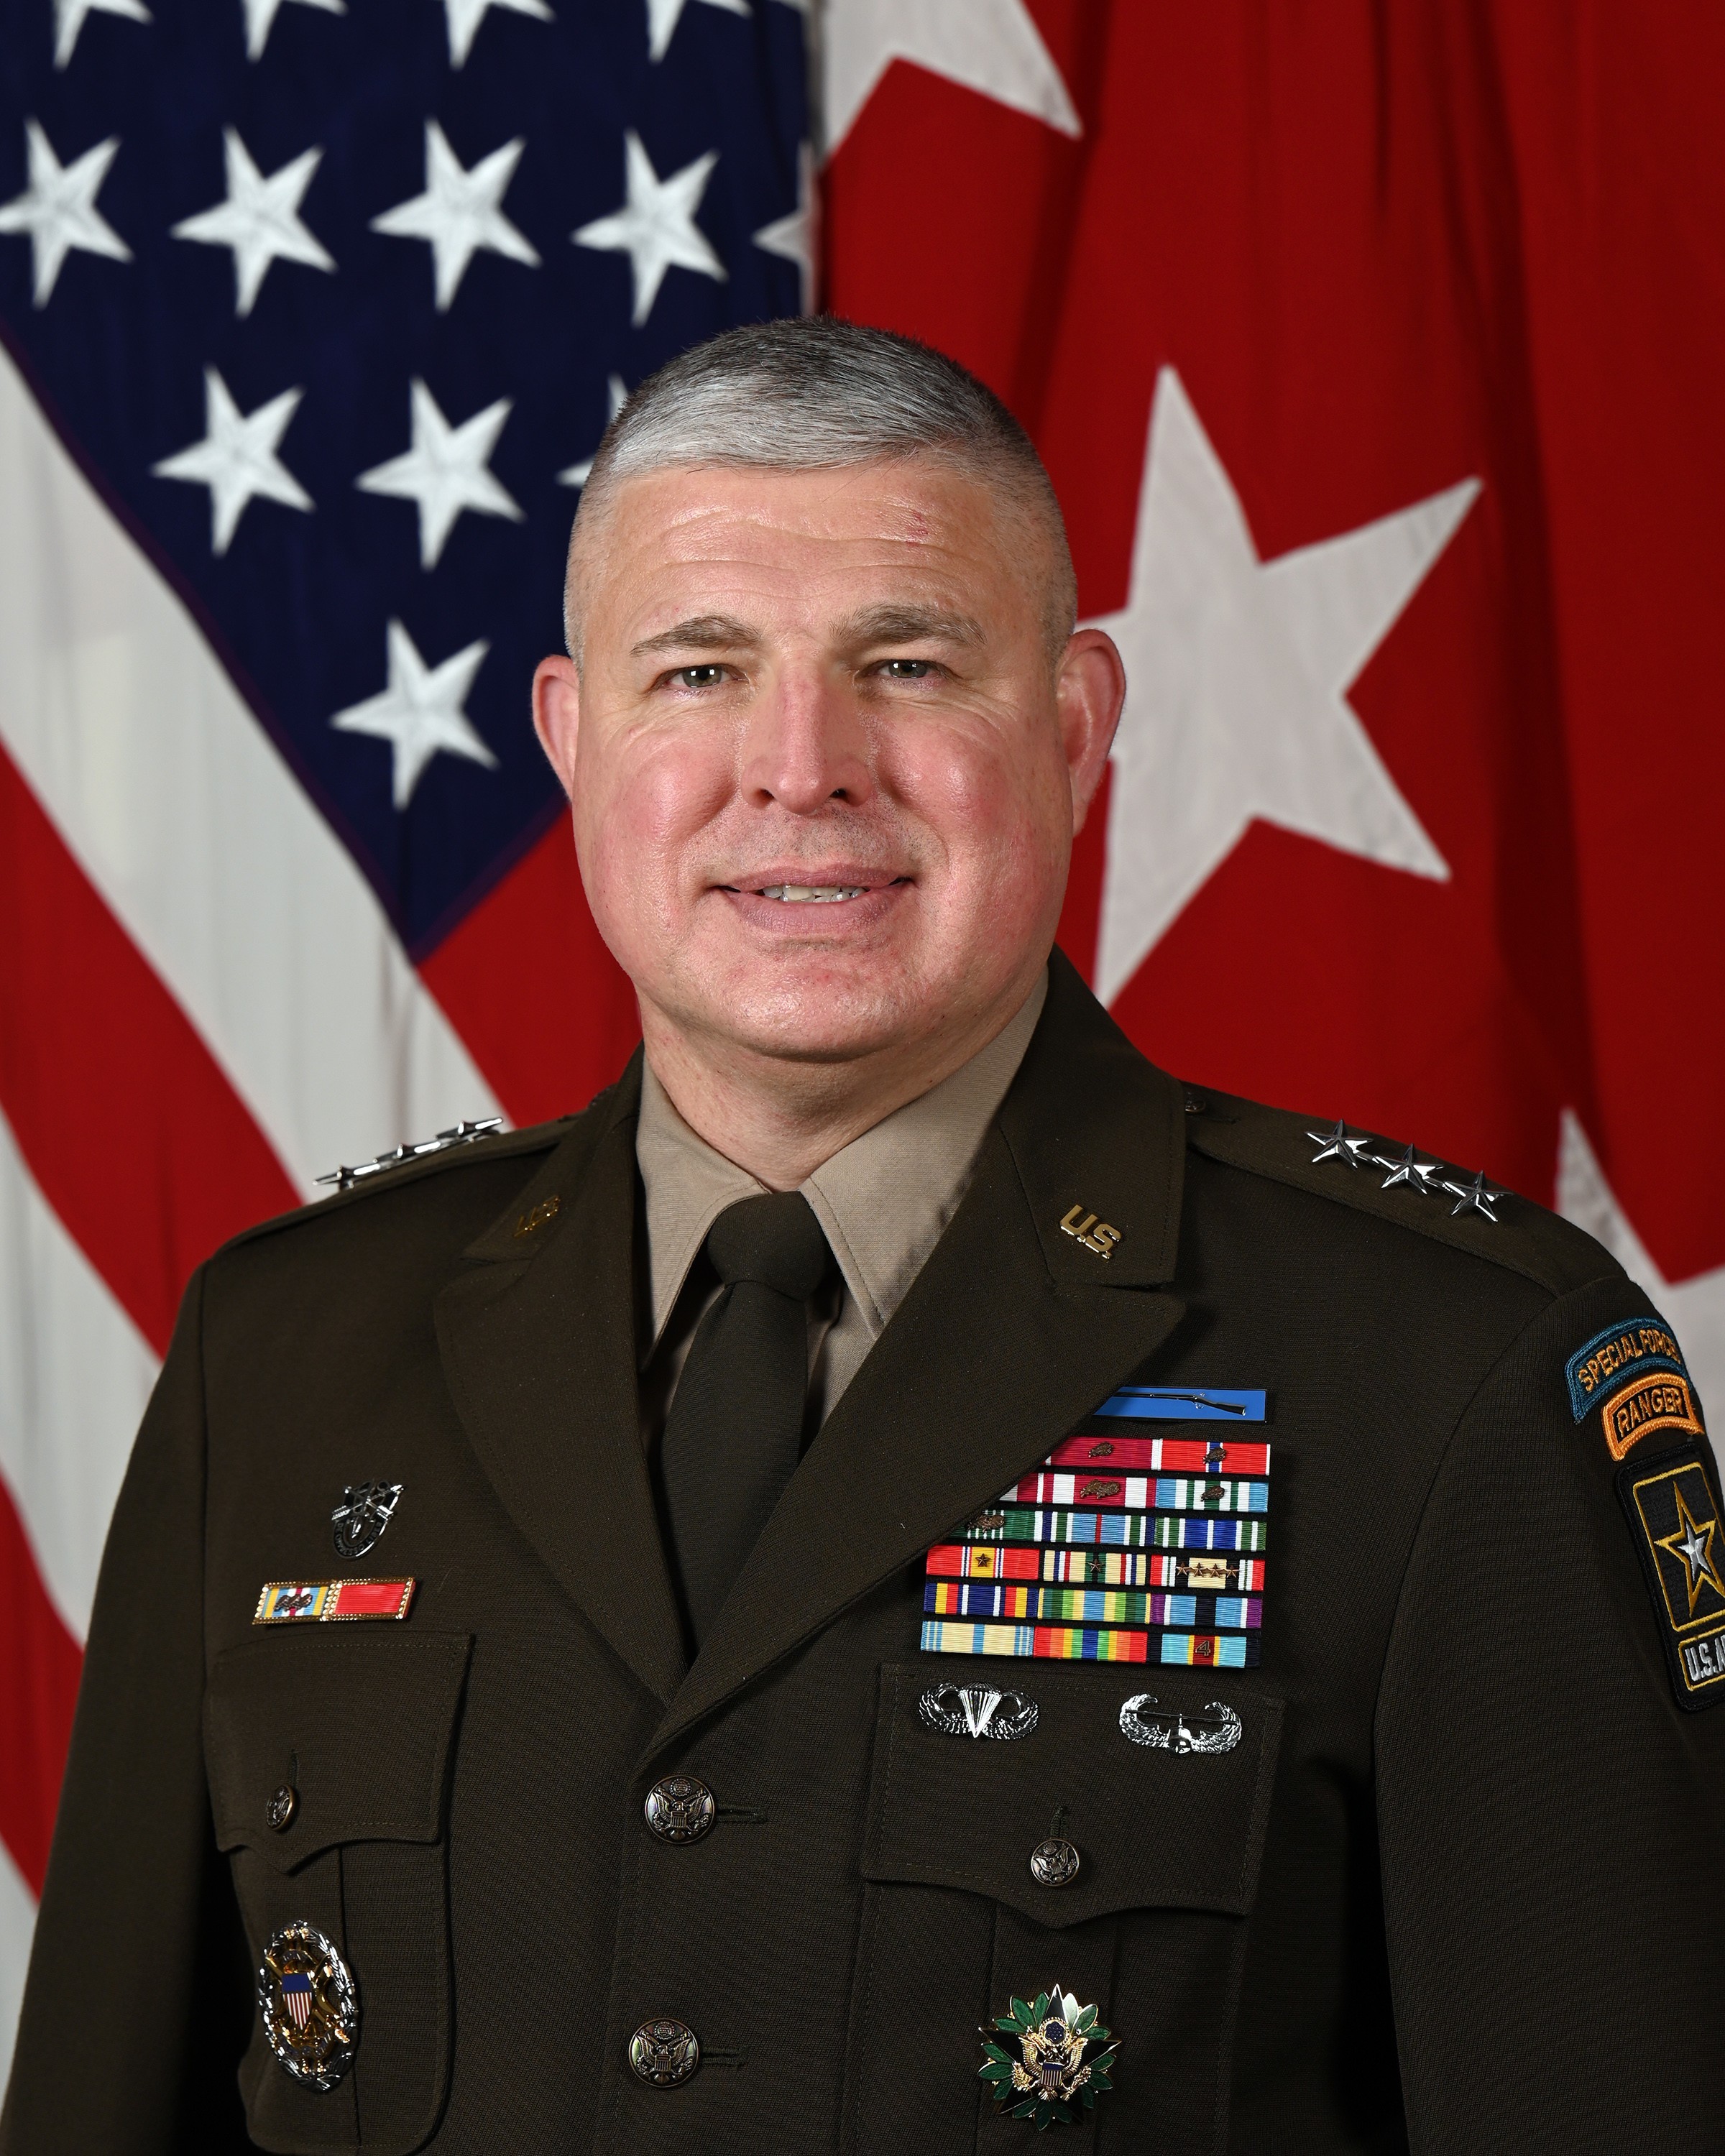 Military Deputy to the Assistant Secretary of the Army for Financial Management and Comptroller